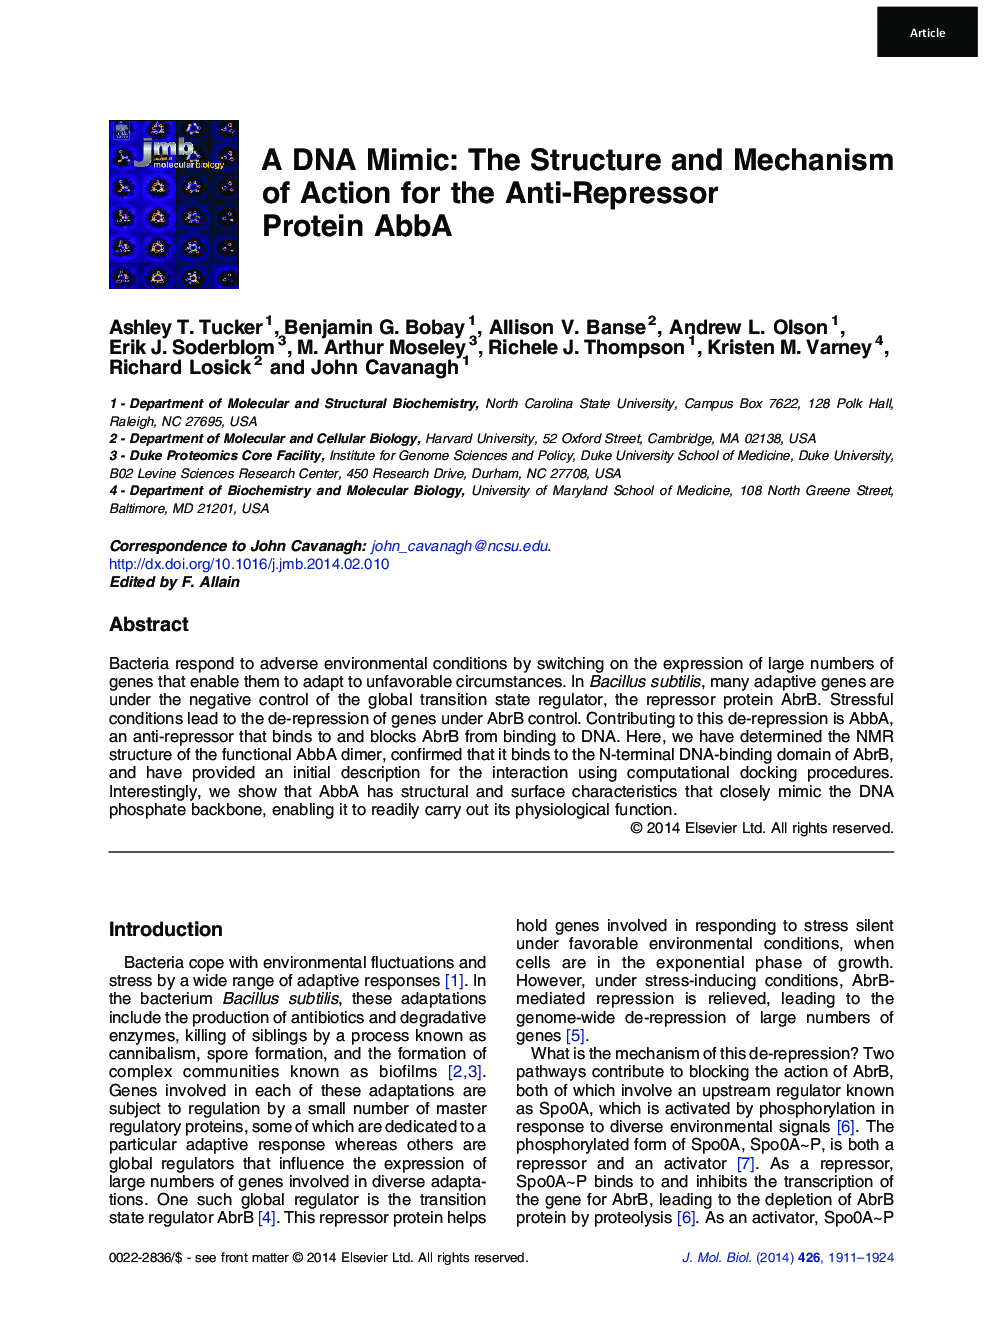 A DNA Mimic: The Structure and Mechanism of Action for the Anti-Repressor Protein AbbA